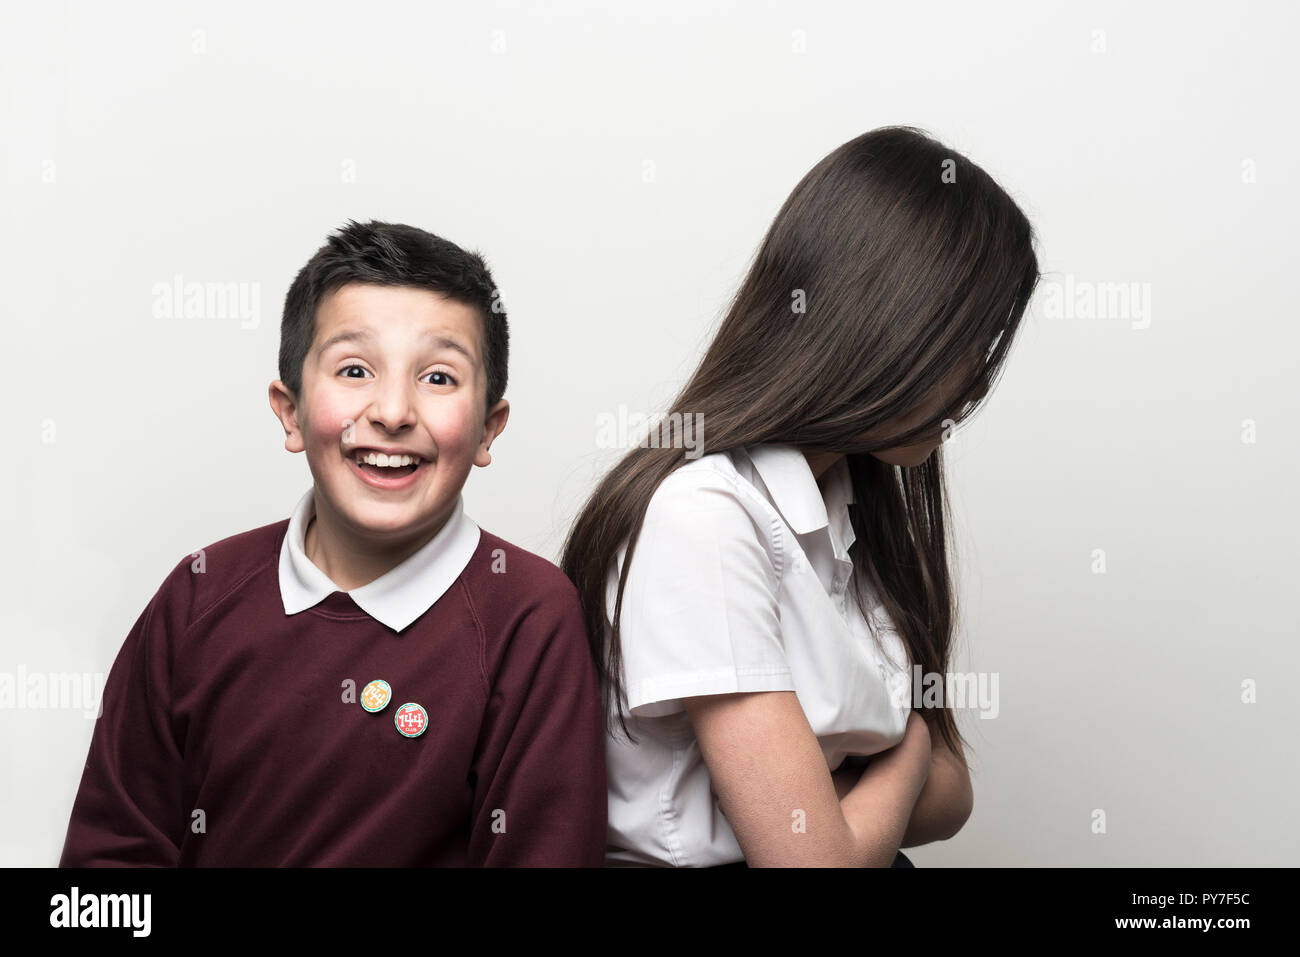 UK, Siblings, brother and older sister. 10 years old pulling funny faces next to his teenage sister.Studio settings Stock Photo